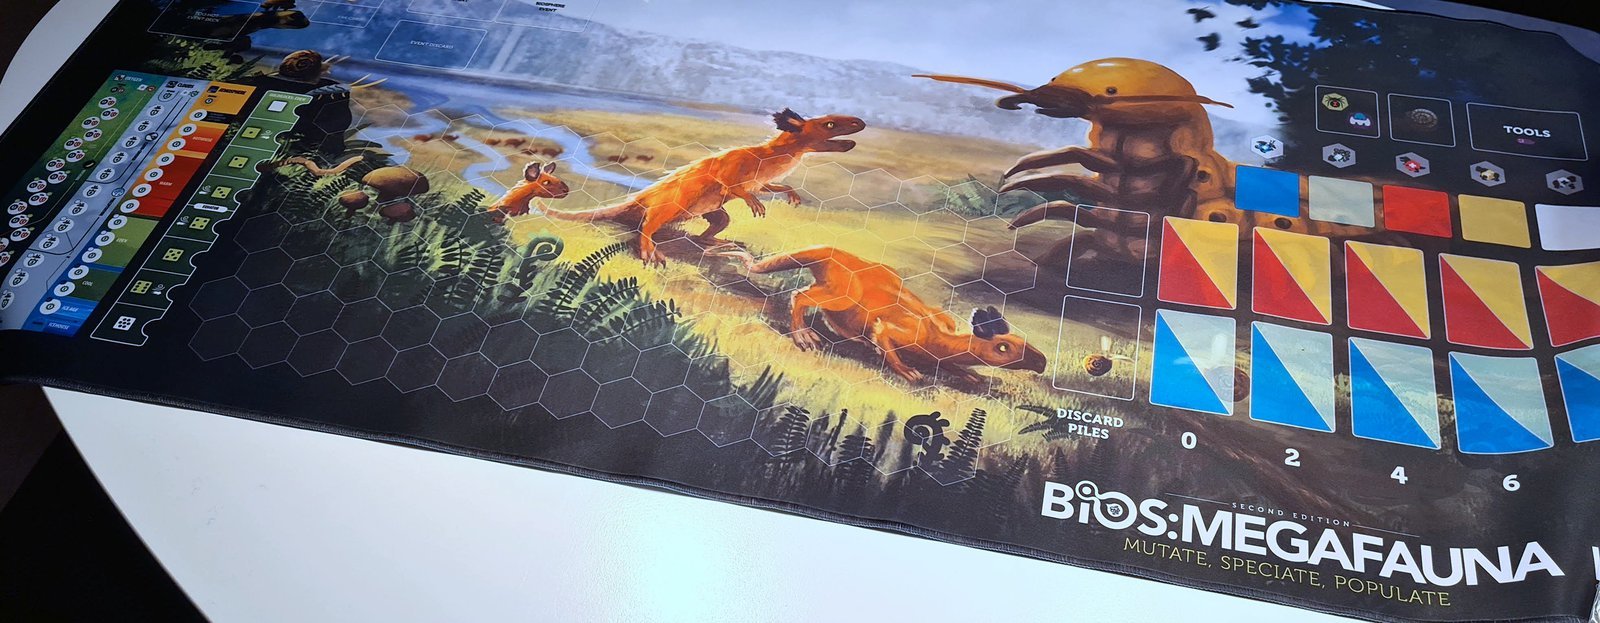 Close-up view of the game board mat design and illustration